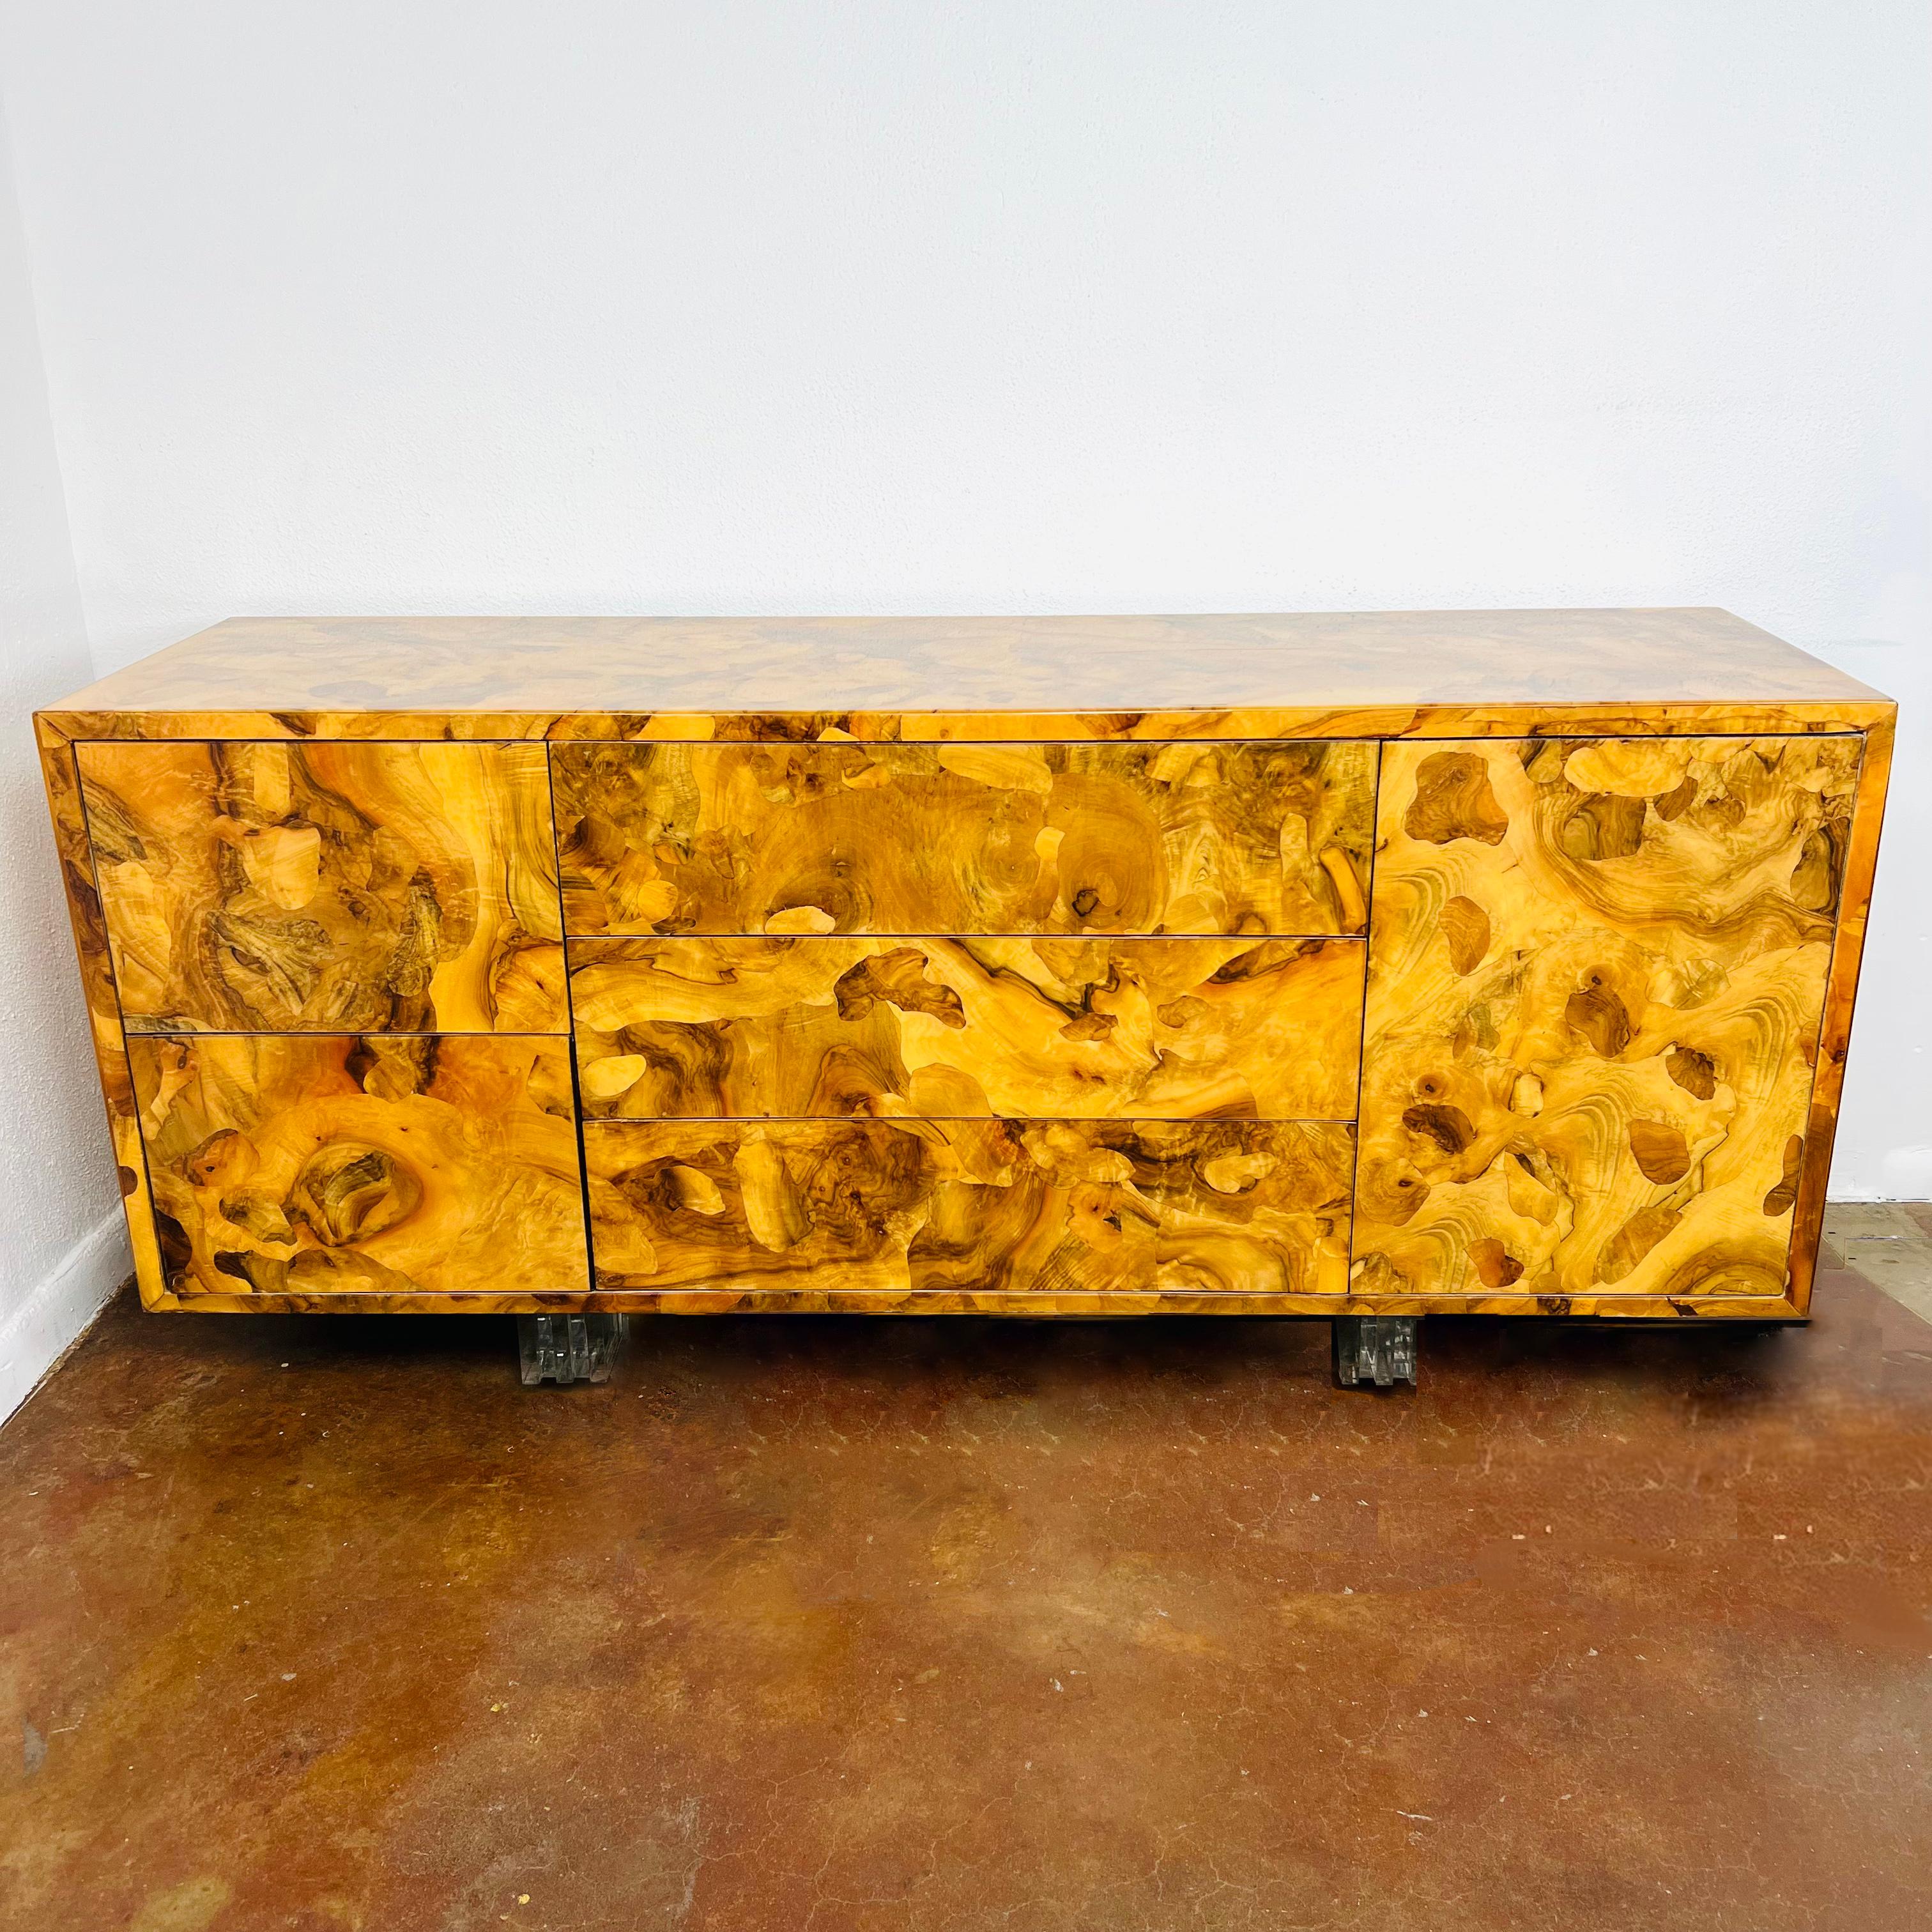 Fabulous, unique 1970s burl wood credenza on stacked lucite legs. An adjustable interior shelf provides storage space, while cabinet faces showcase unique and naturally occurring patterns in the wood. Form plus function equals fabulously cool.